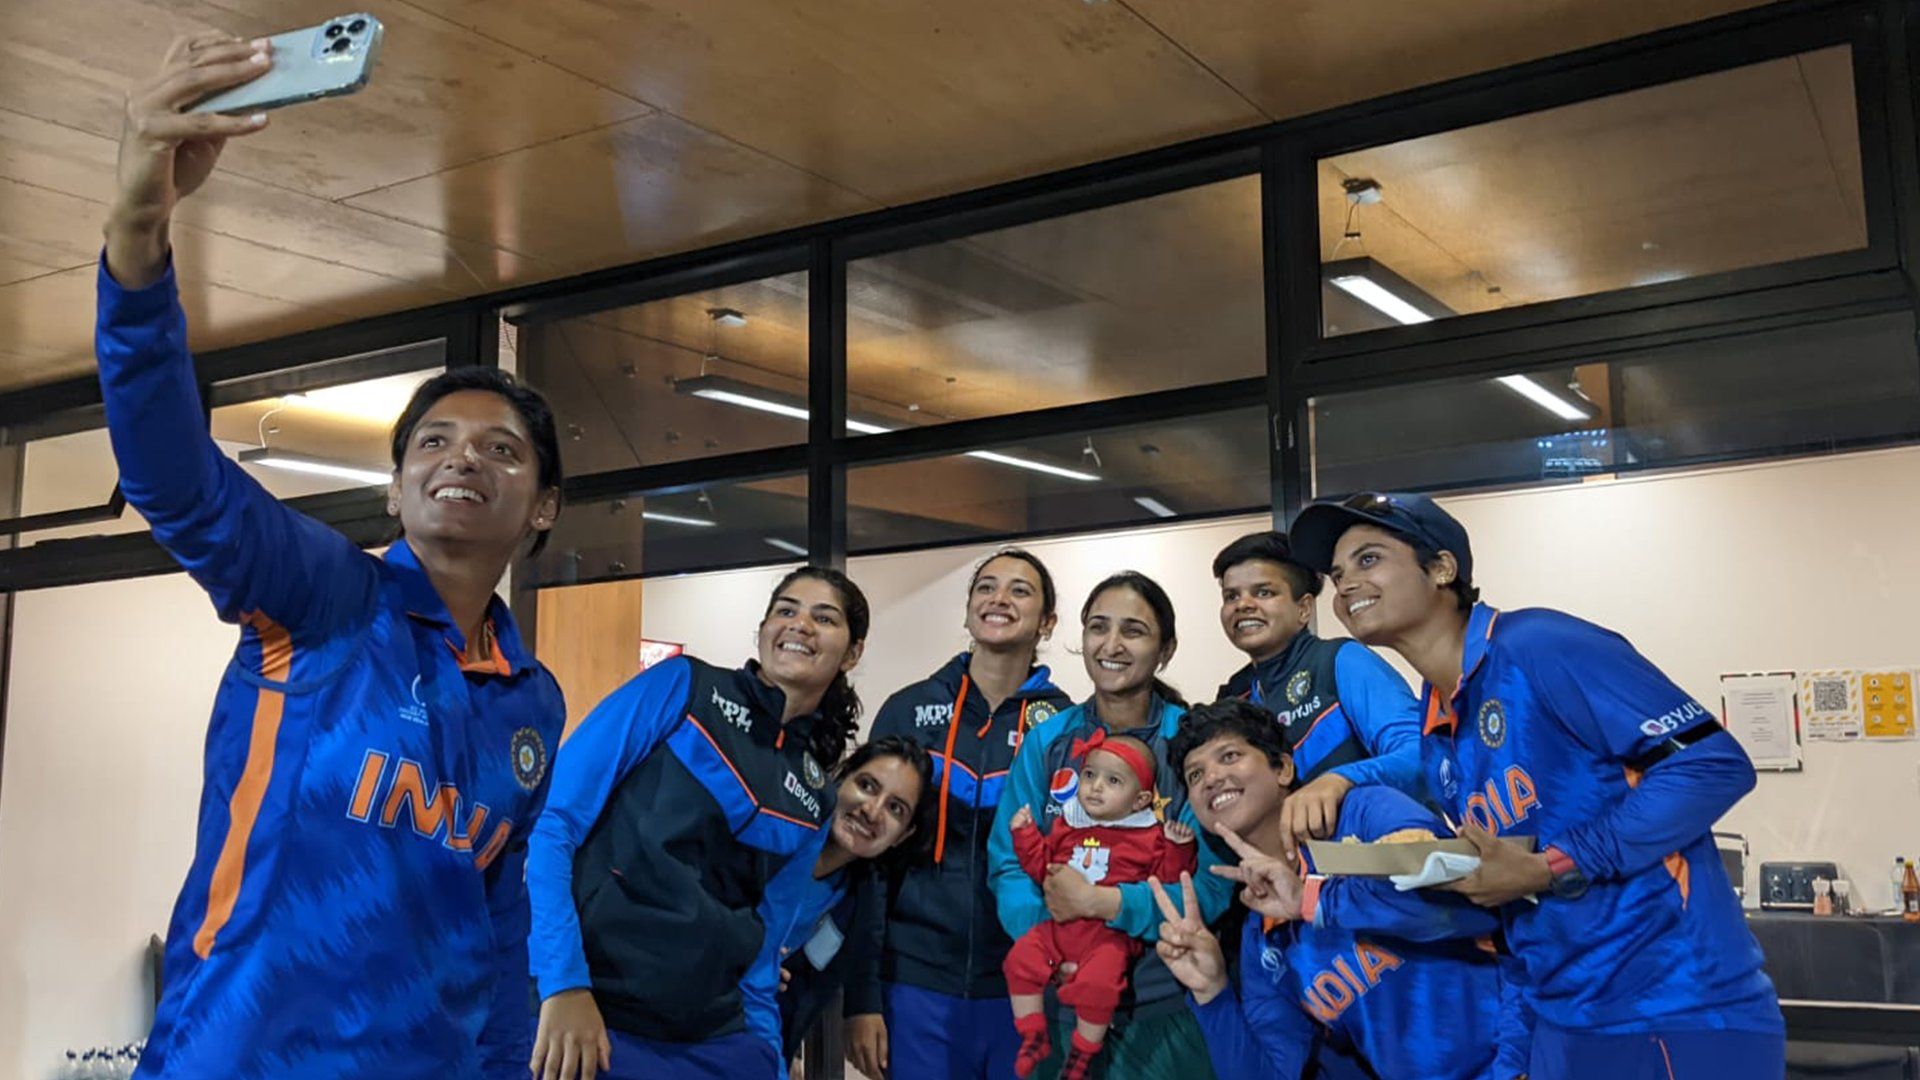 Indian womens team playing with Pakistan captains baby wins the internet